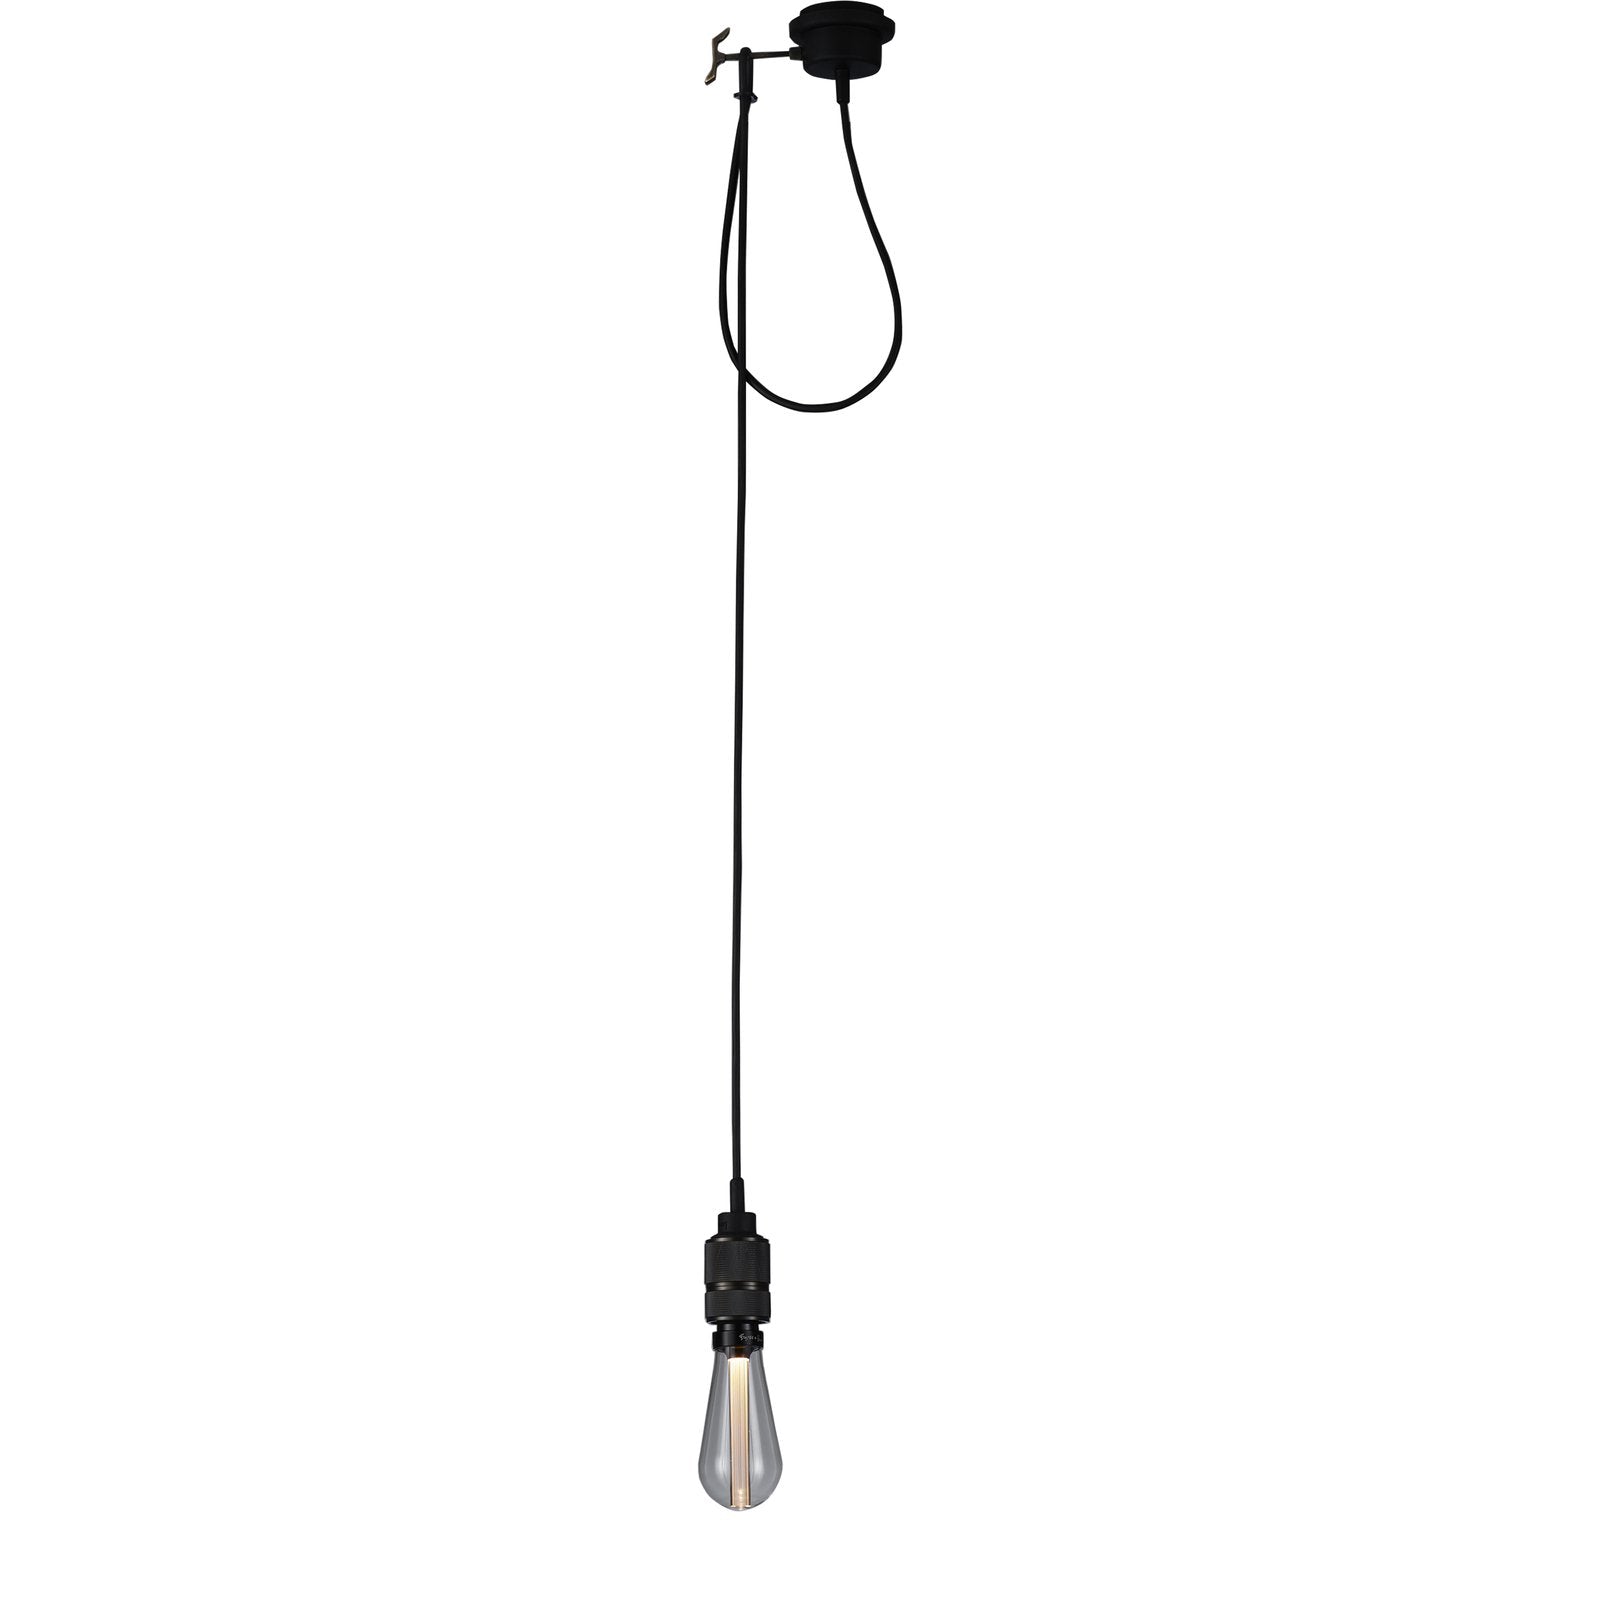 Buster and Punch - Hooked 1.0 / Nude 2.0m Hanglamp